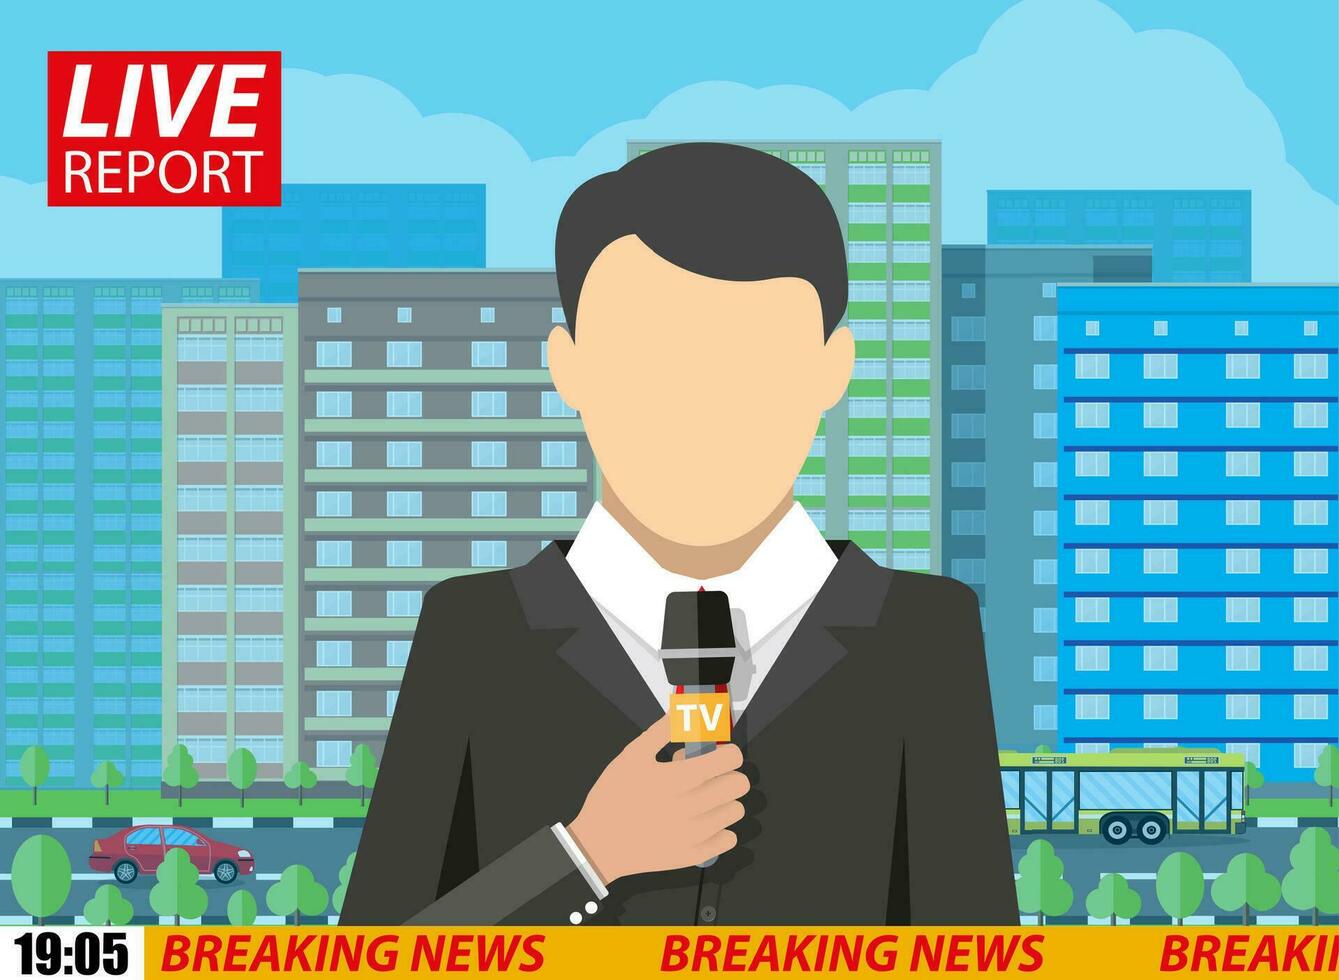 News reporter men with microphone on street with roads, buildings, car and trees. breaking news. television. press. vector illustration in flat style